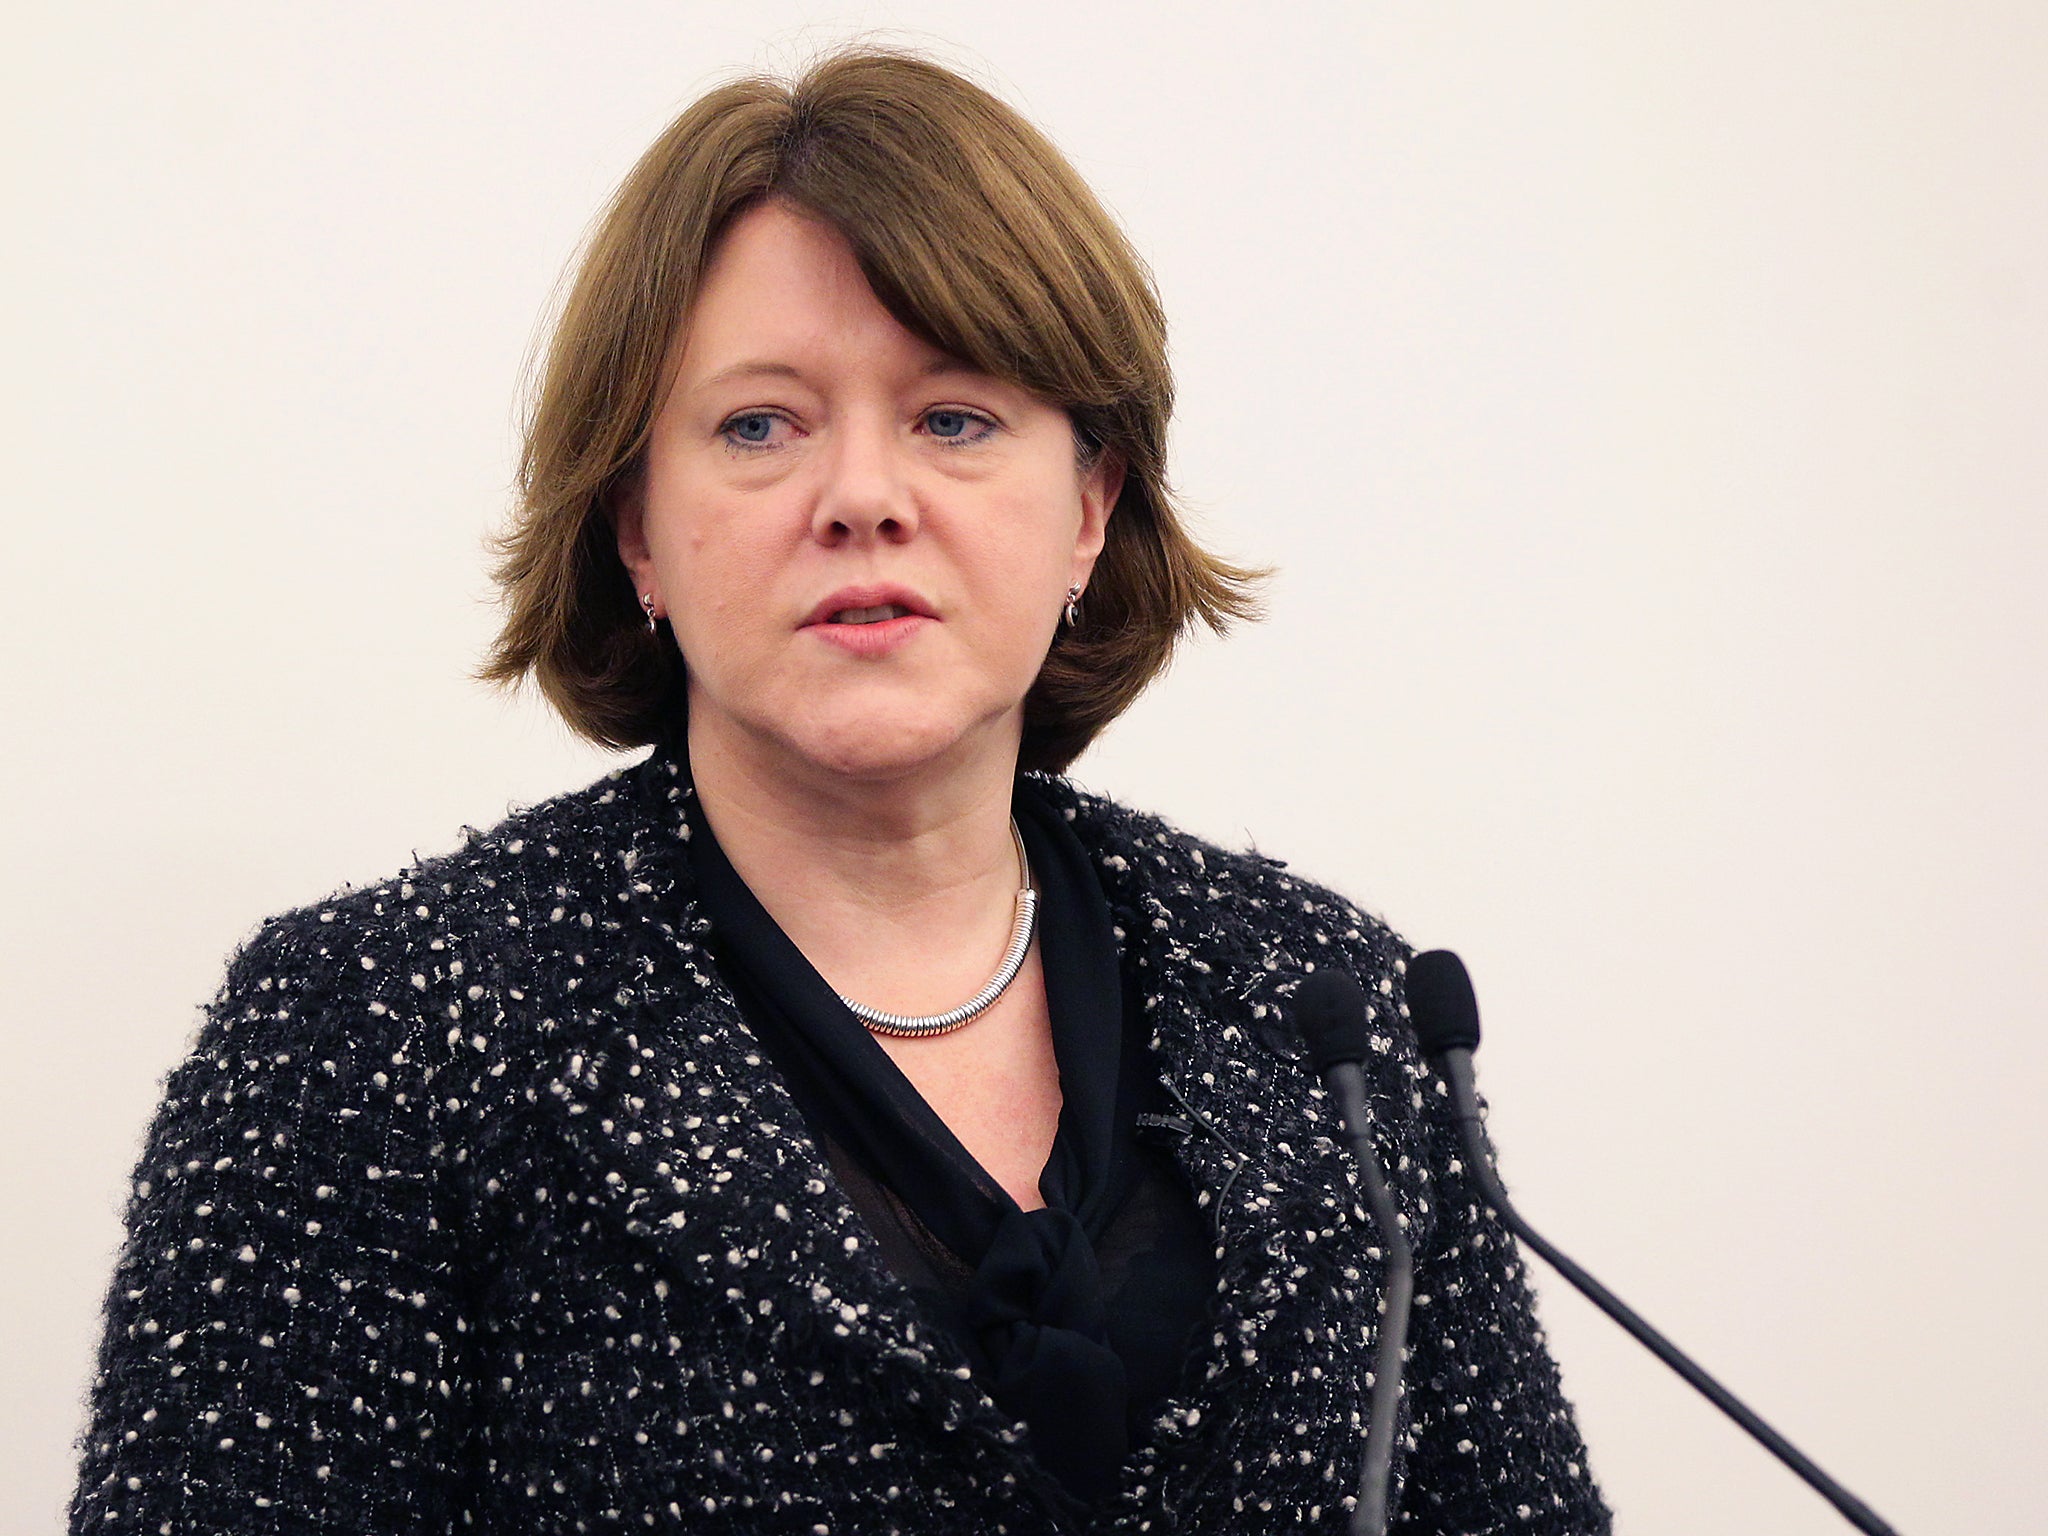 Maria Miller, chair of the Women and Equalities Committee, has raised concerns about ministerial churn at the Equalities Office